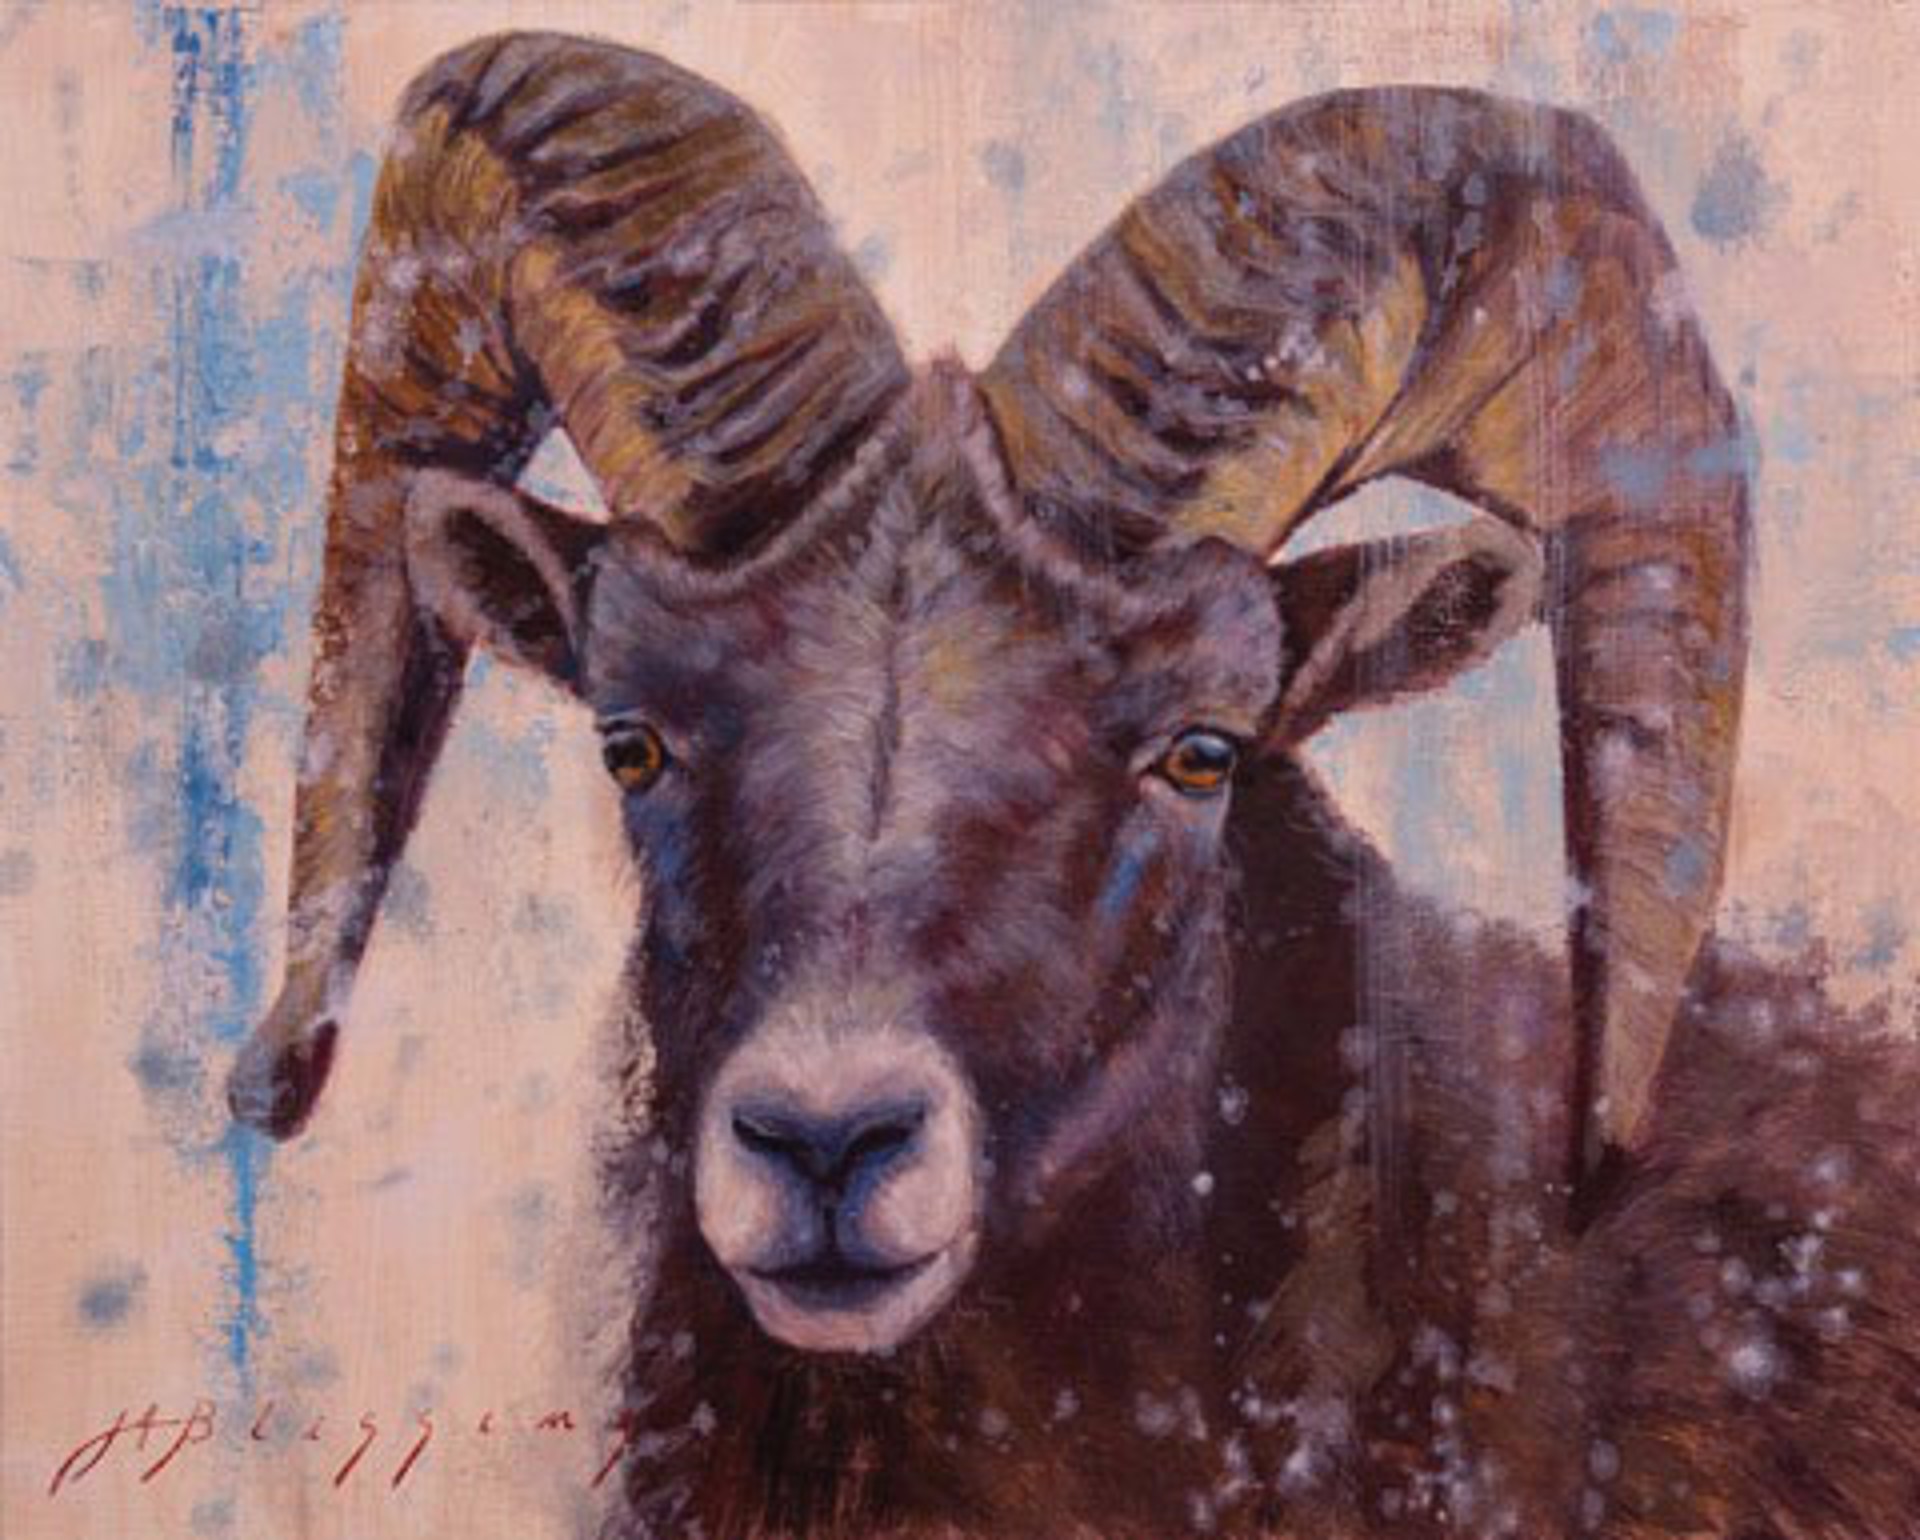 Original Oil Painting Featuring A Big Horn Sheep Portrait Over Blue And Tan Abstract Background